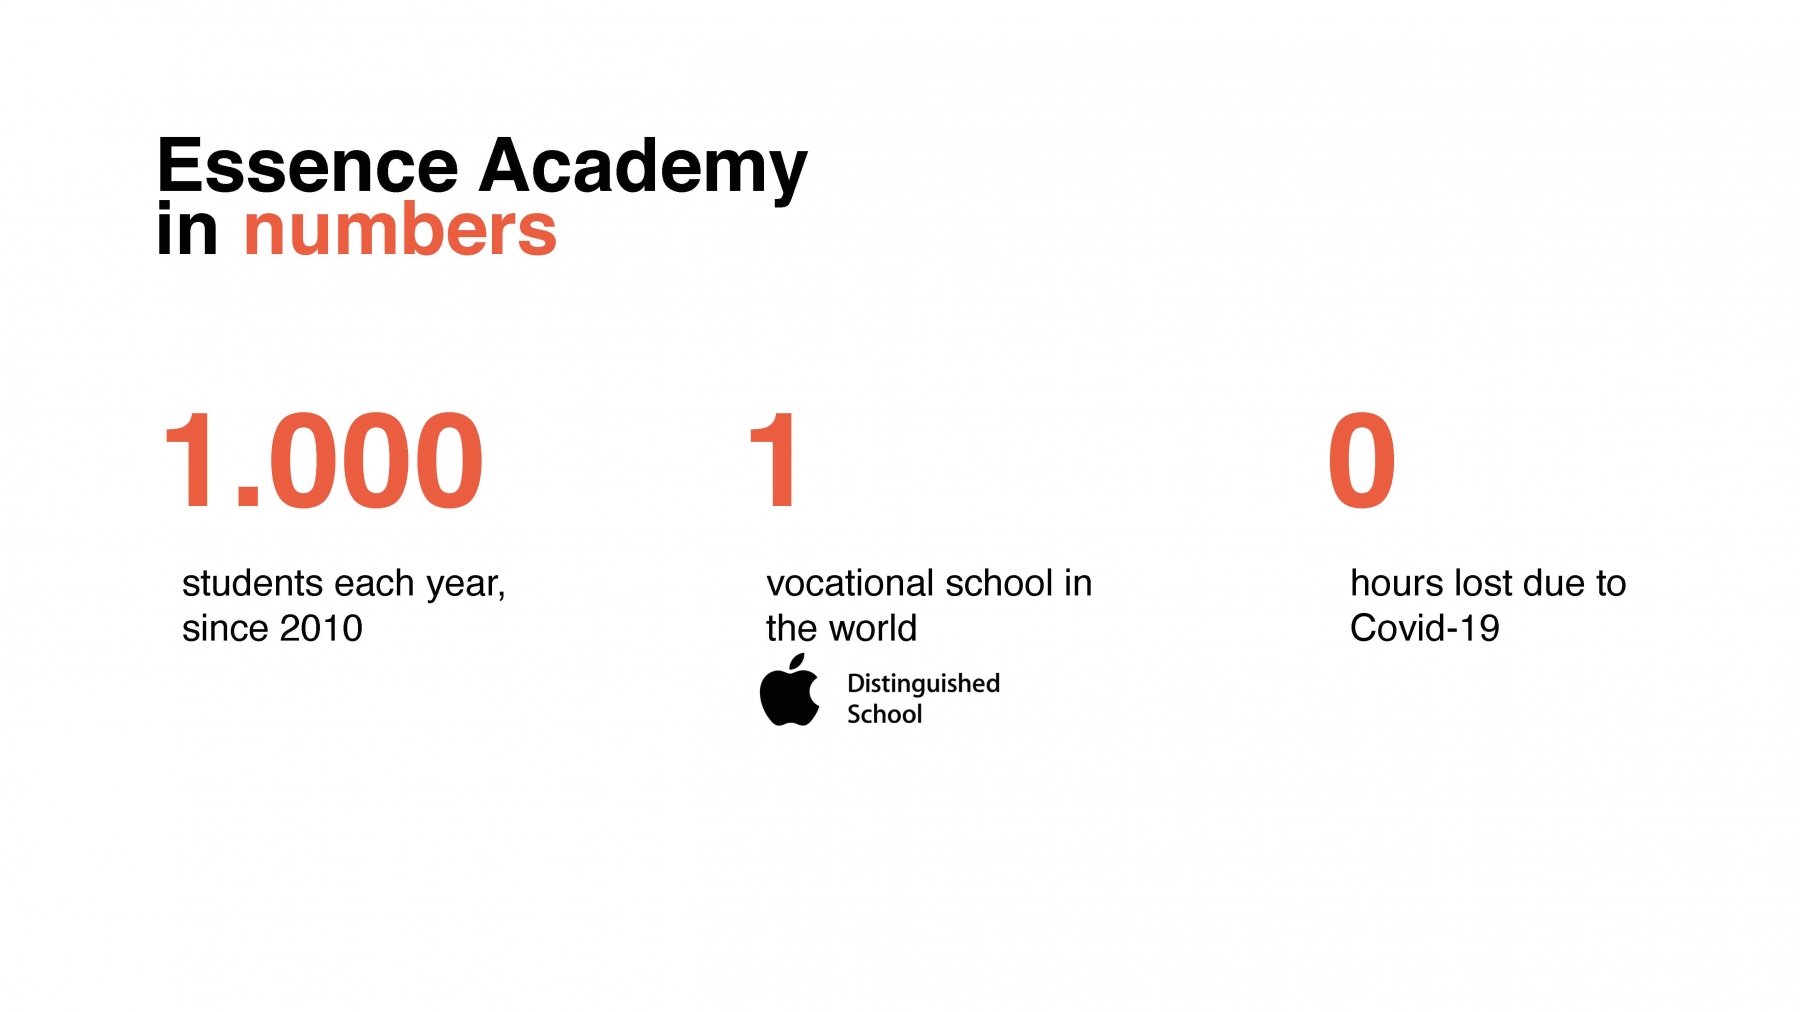 Essence Academy (pres. by Pierpaolo Massone)